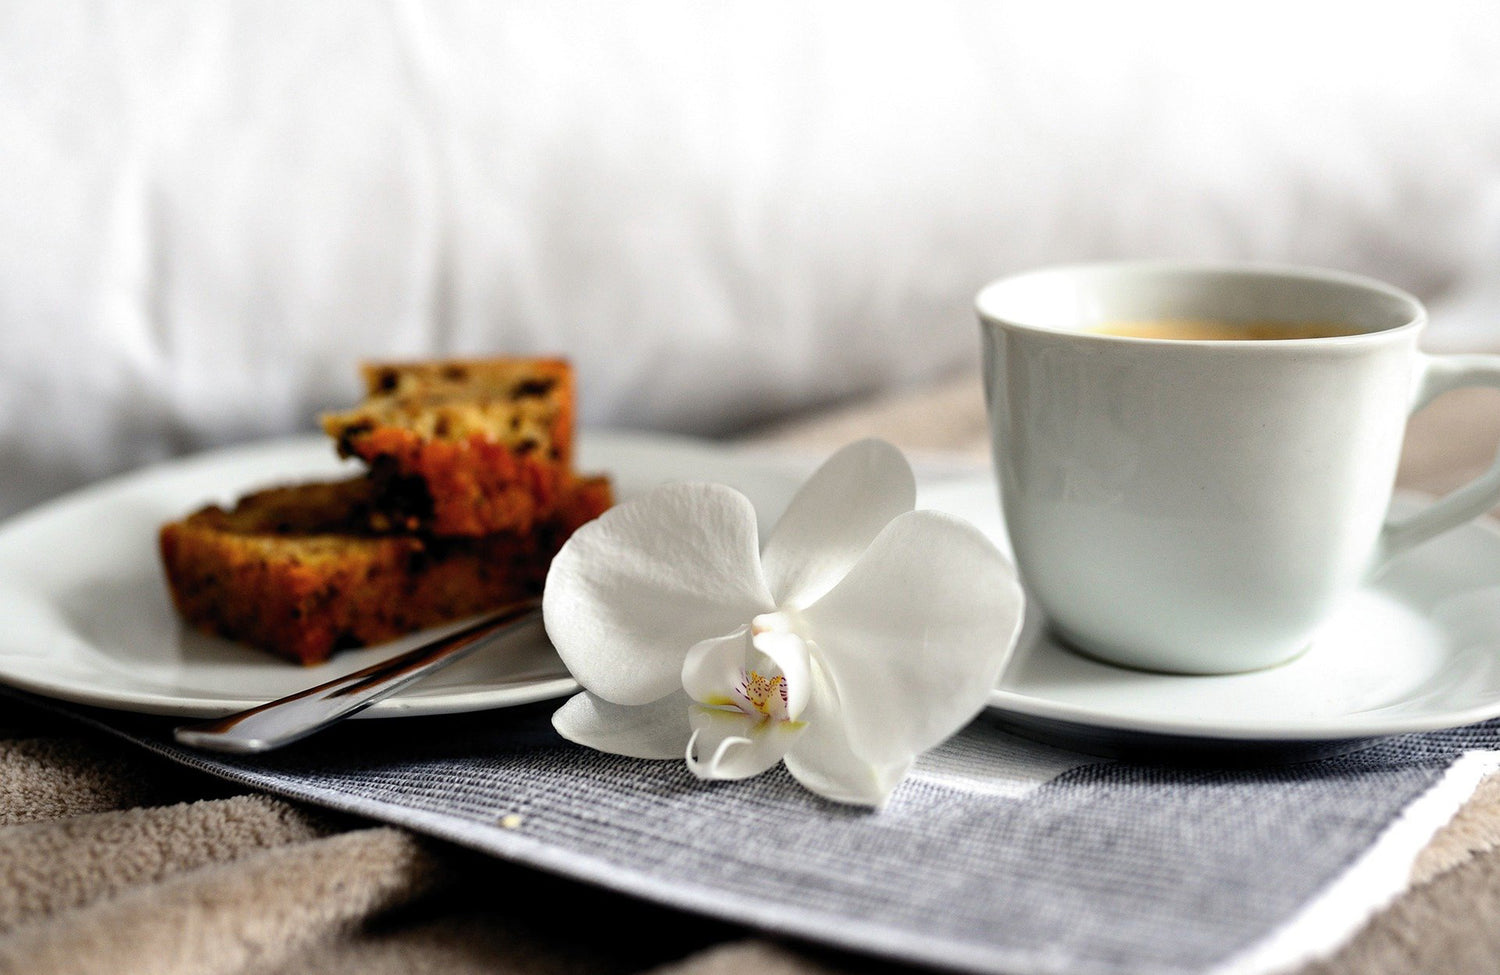 Mothers day delivery Melbourne of breakfast in bed with flowers and coffee